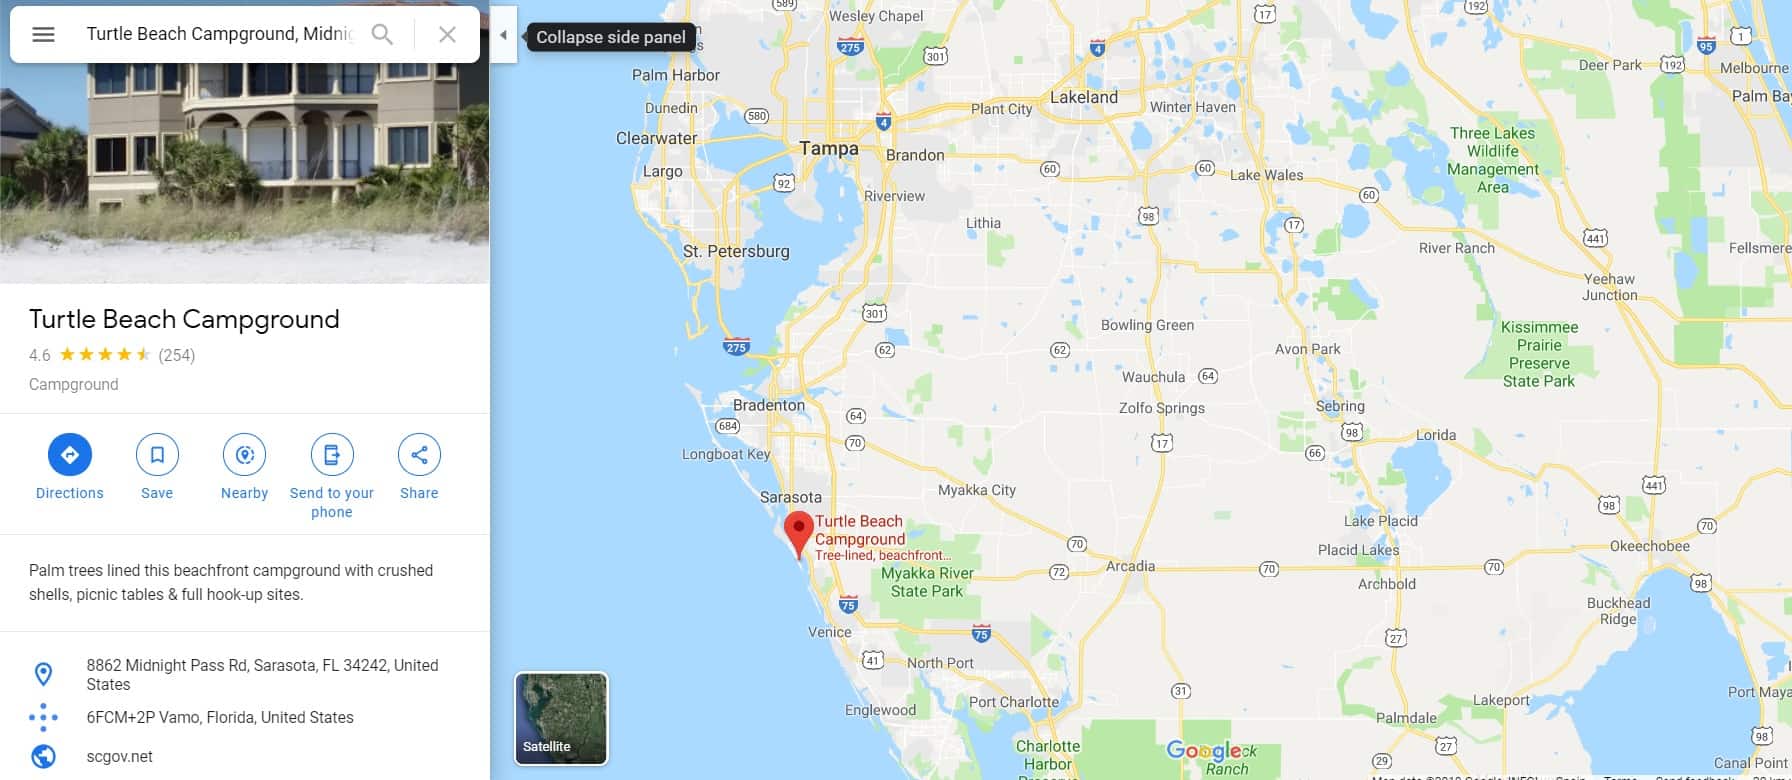 Turtle Beach Campground Florida Camping Traveling Lifestyle